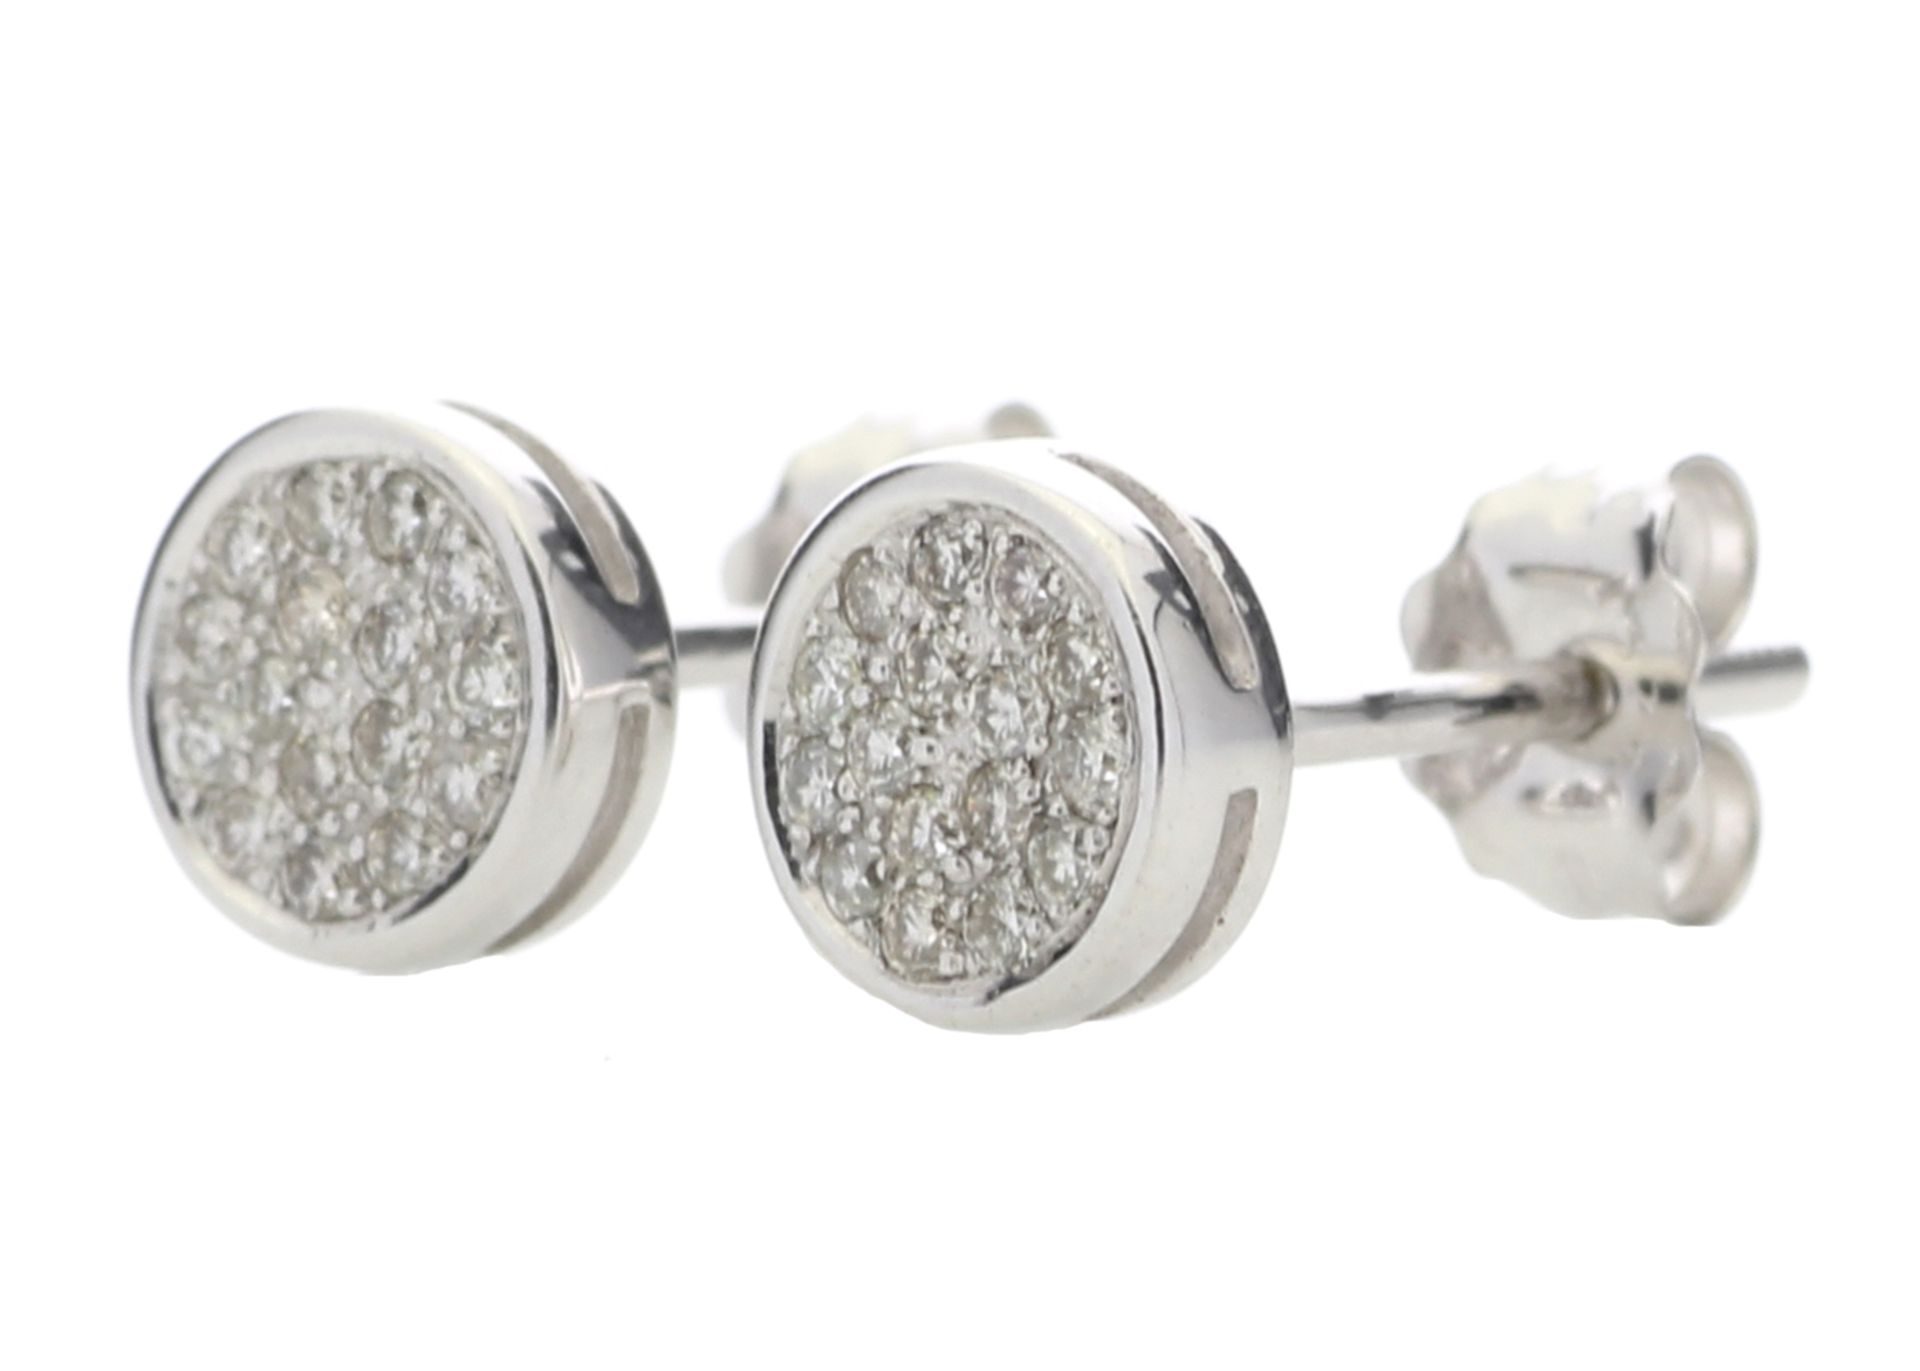 9ct White Gold Diamond Cluster Earring 0.16 Carats - Valued by GIE £1,805.00 - These elegant - Image 2 of 5